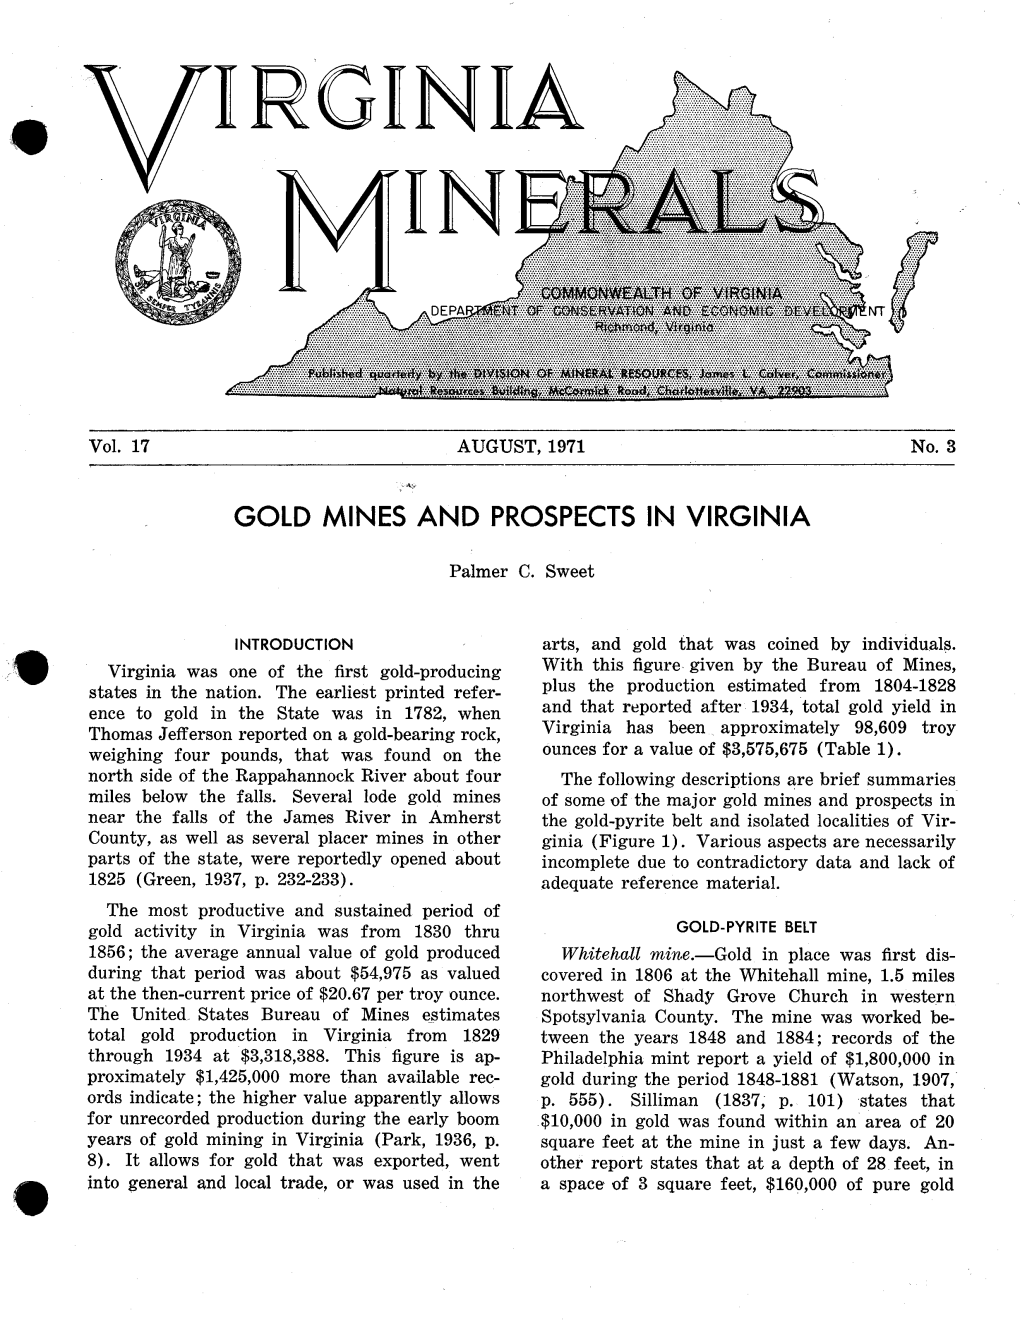 Gold Mines and Prospects in Virginia